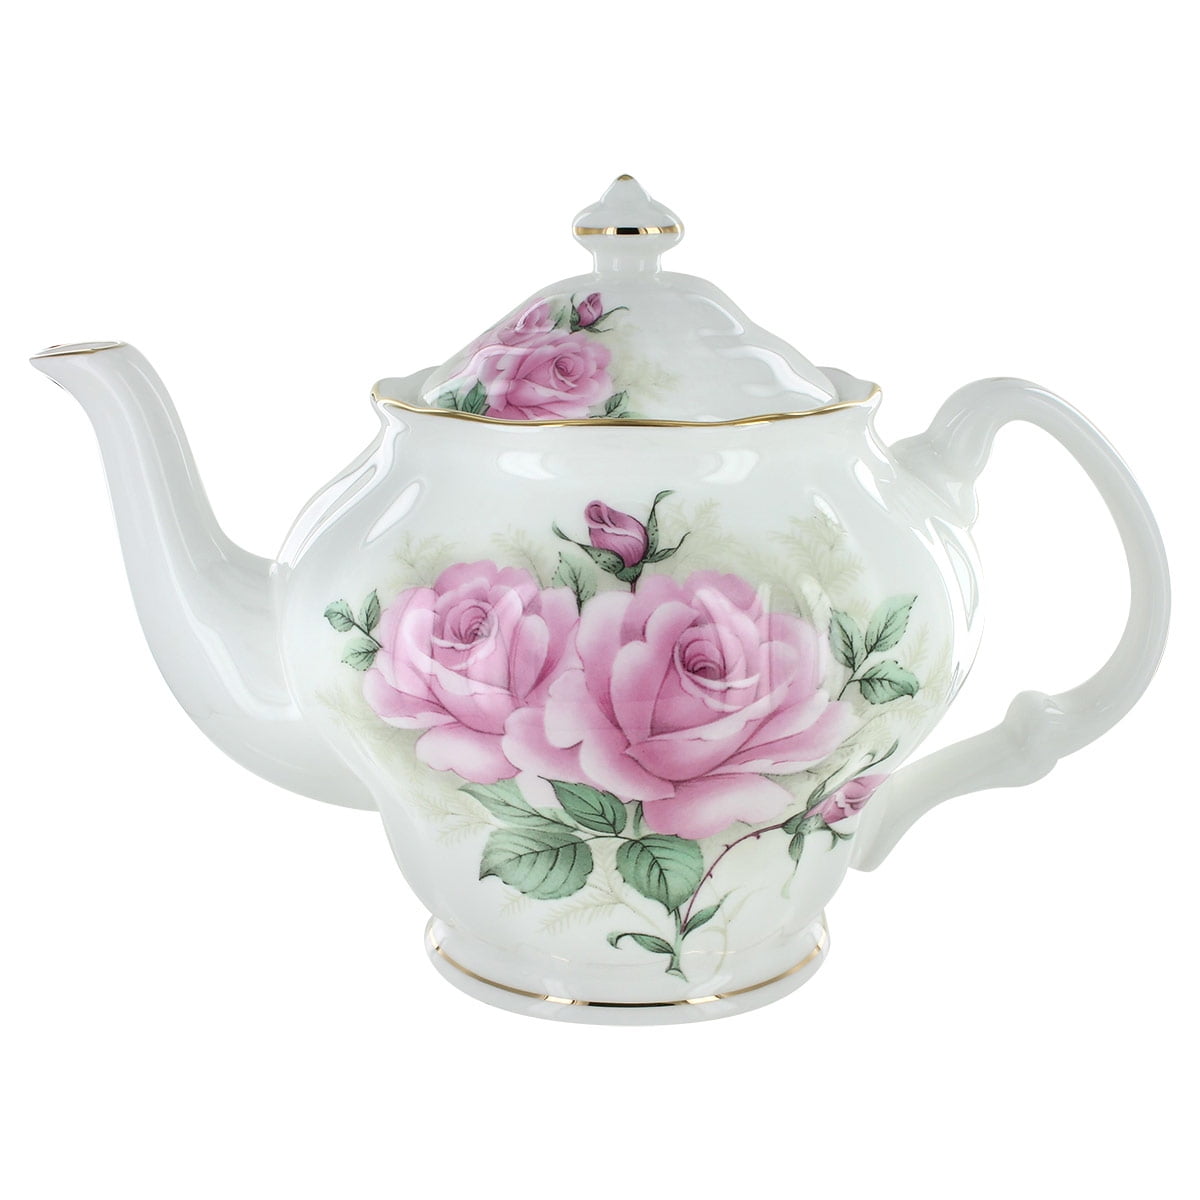 Details about   Majestic Rose Teapot Fine Bone China 20oz Pink Roses Small Teapot Decorated UK 